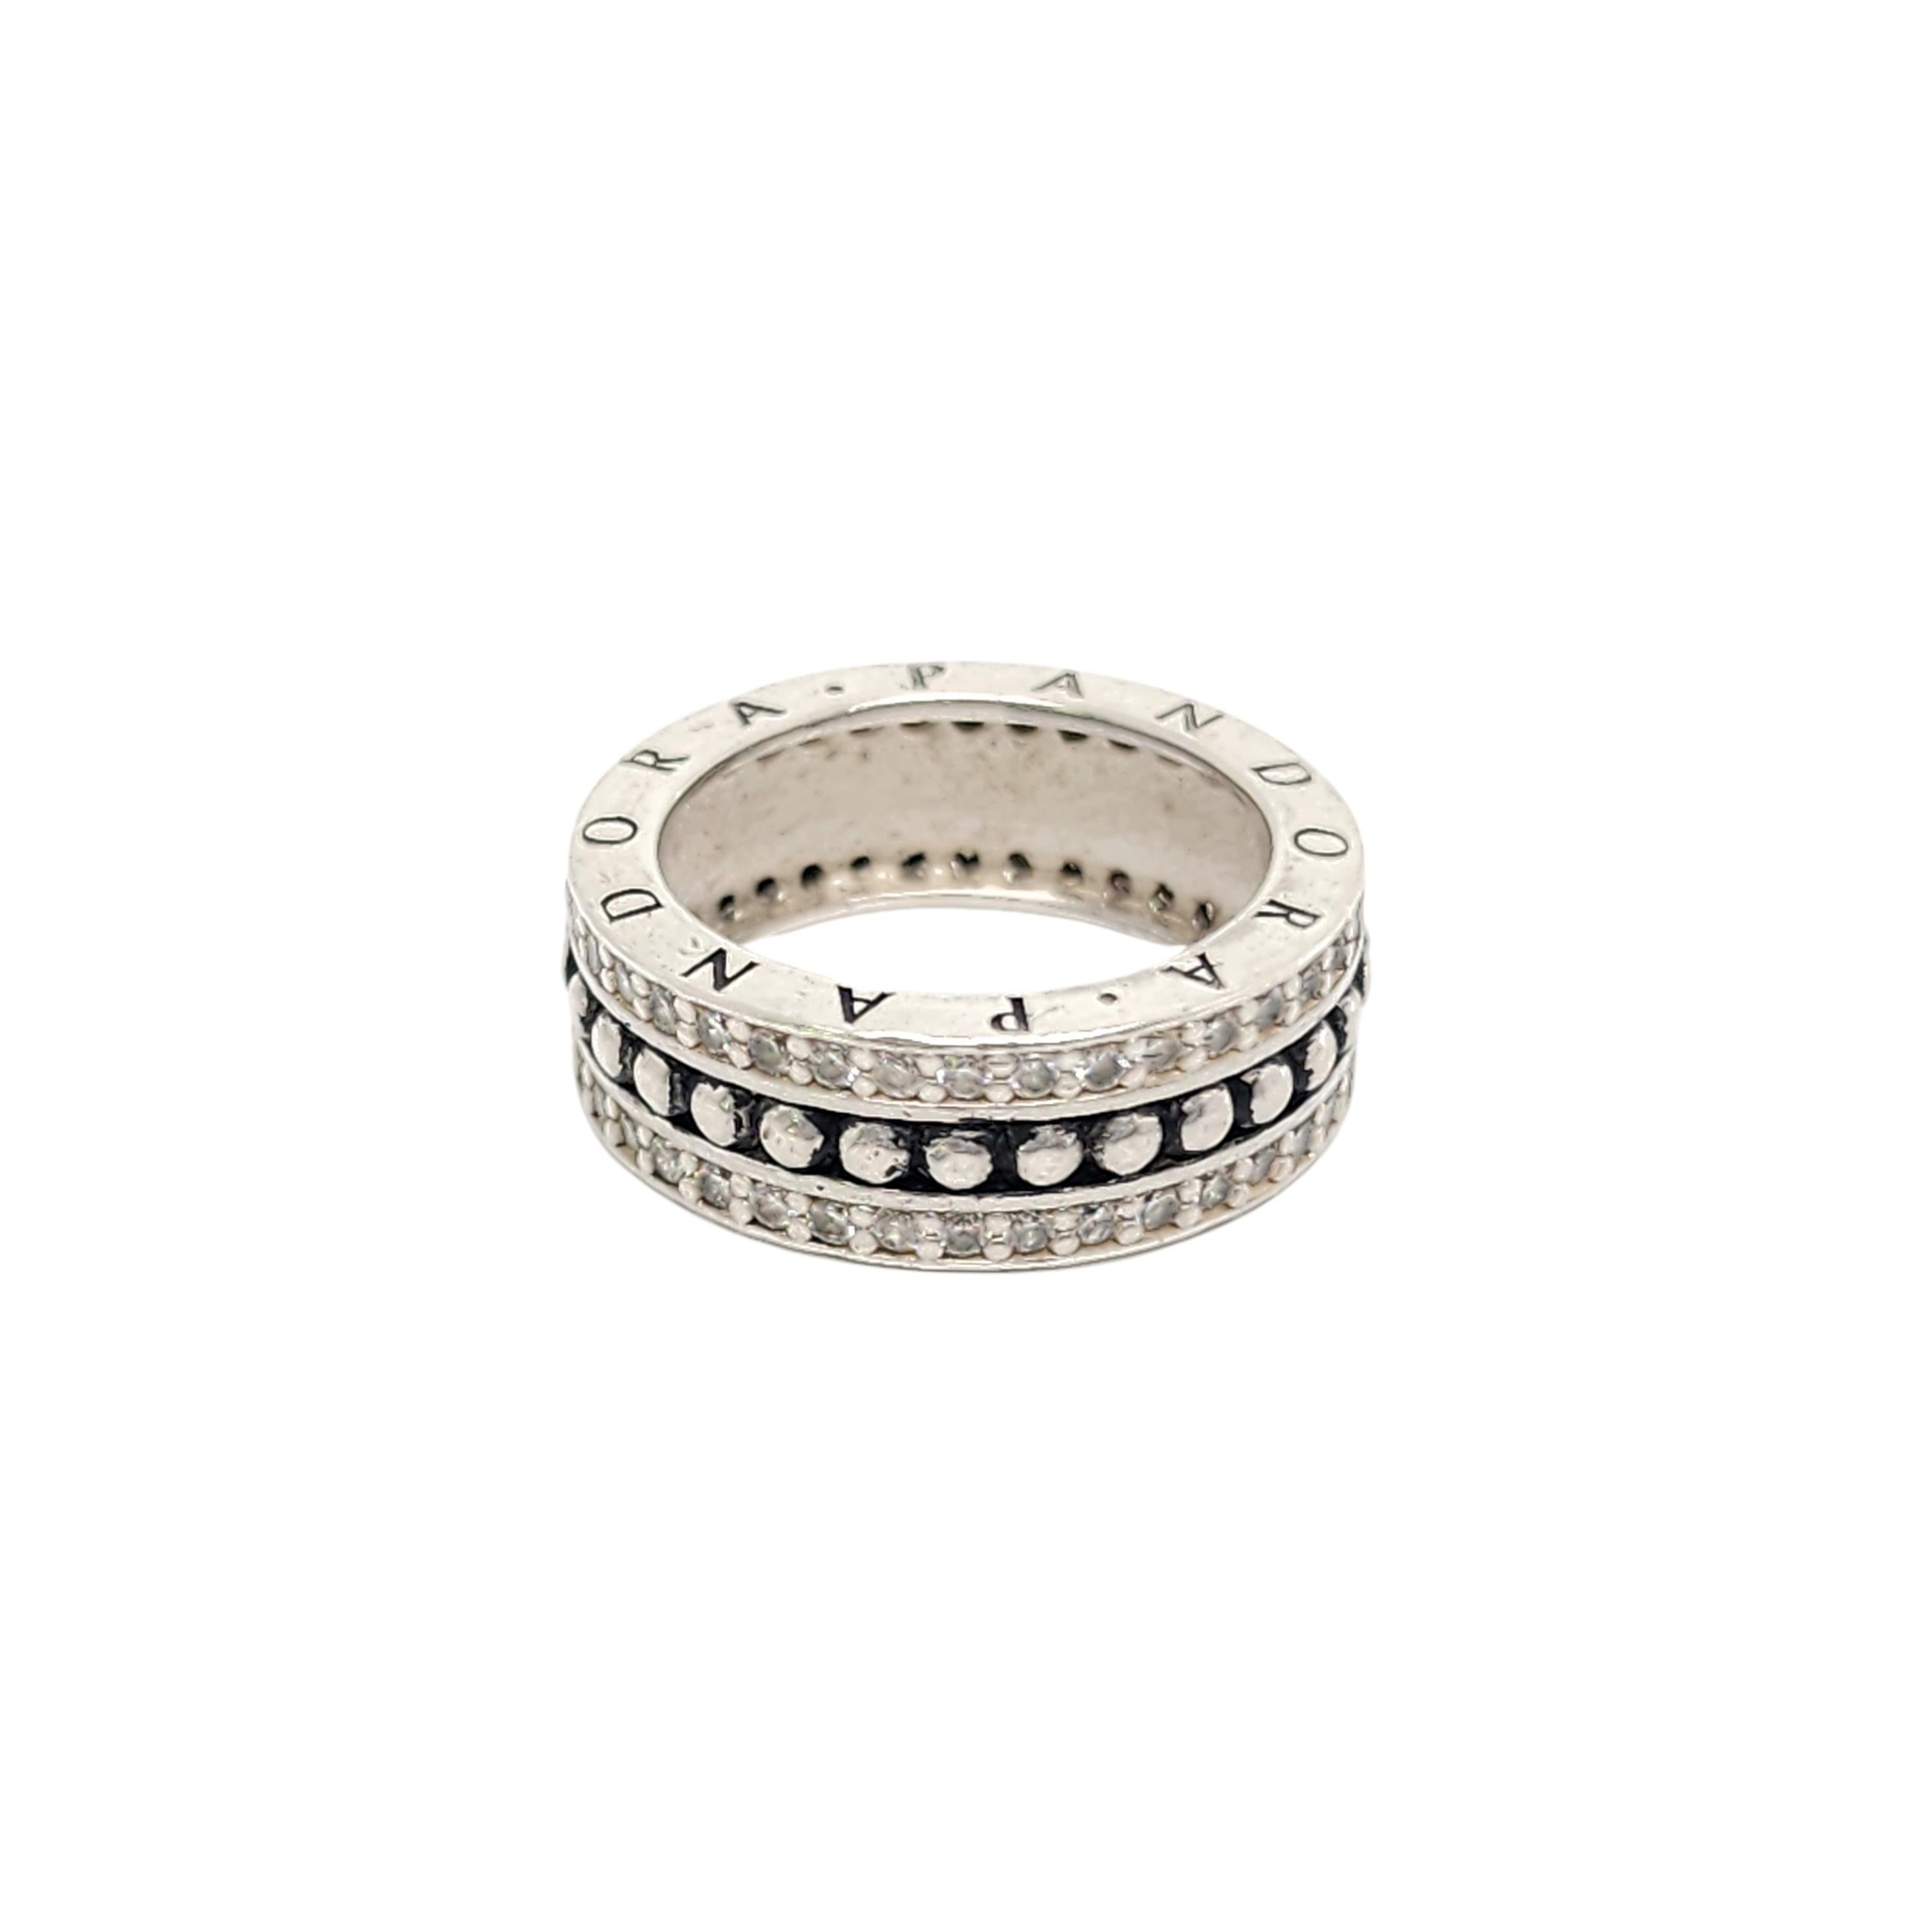 Authentic Pandora sterling silver CZ Forever ring.

Size 54 (approx 7 US)

Pandora #190962CZ

Sterling silver band with a middle bead design row and a row of CZs on the top and bottom.

Measures approx 1/4